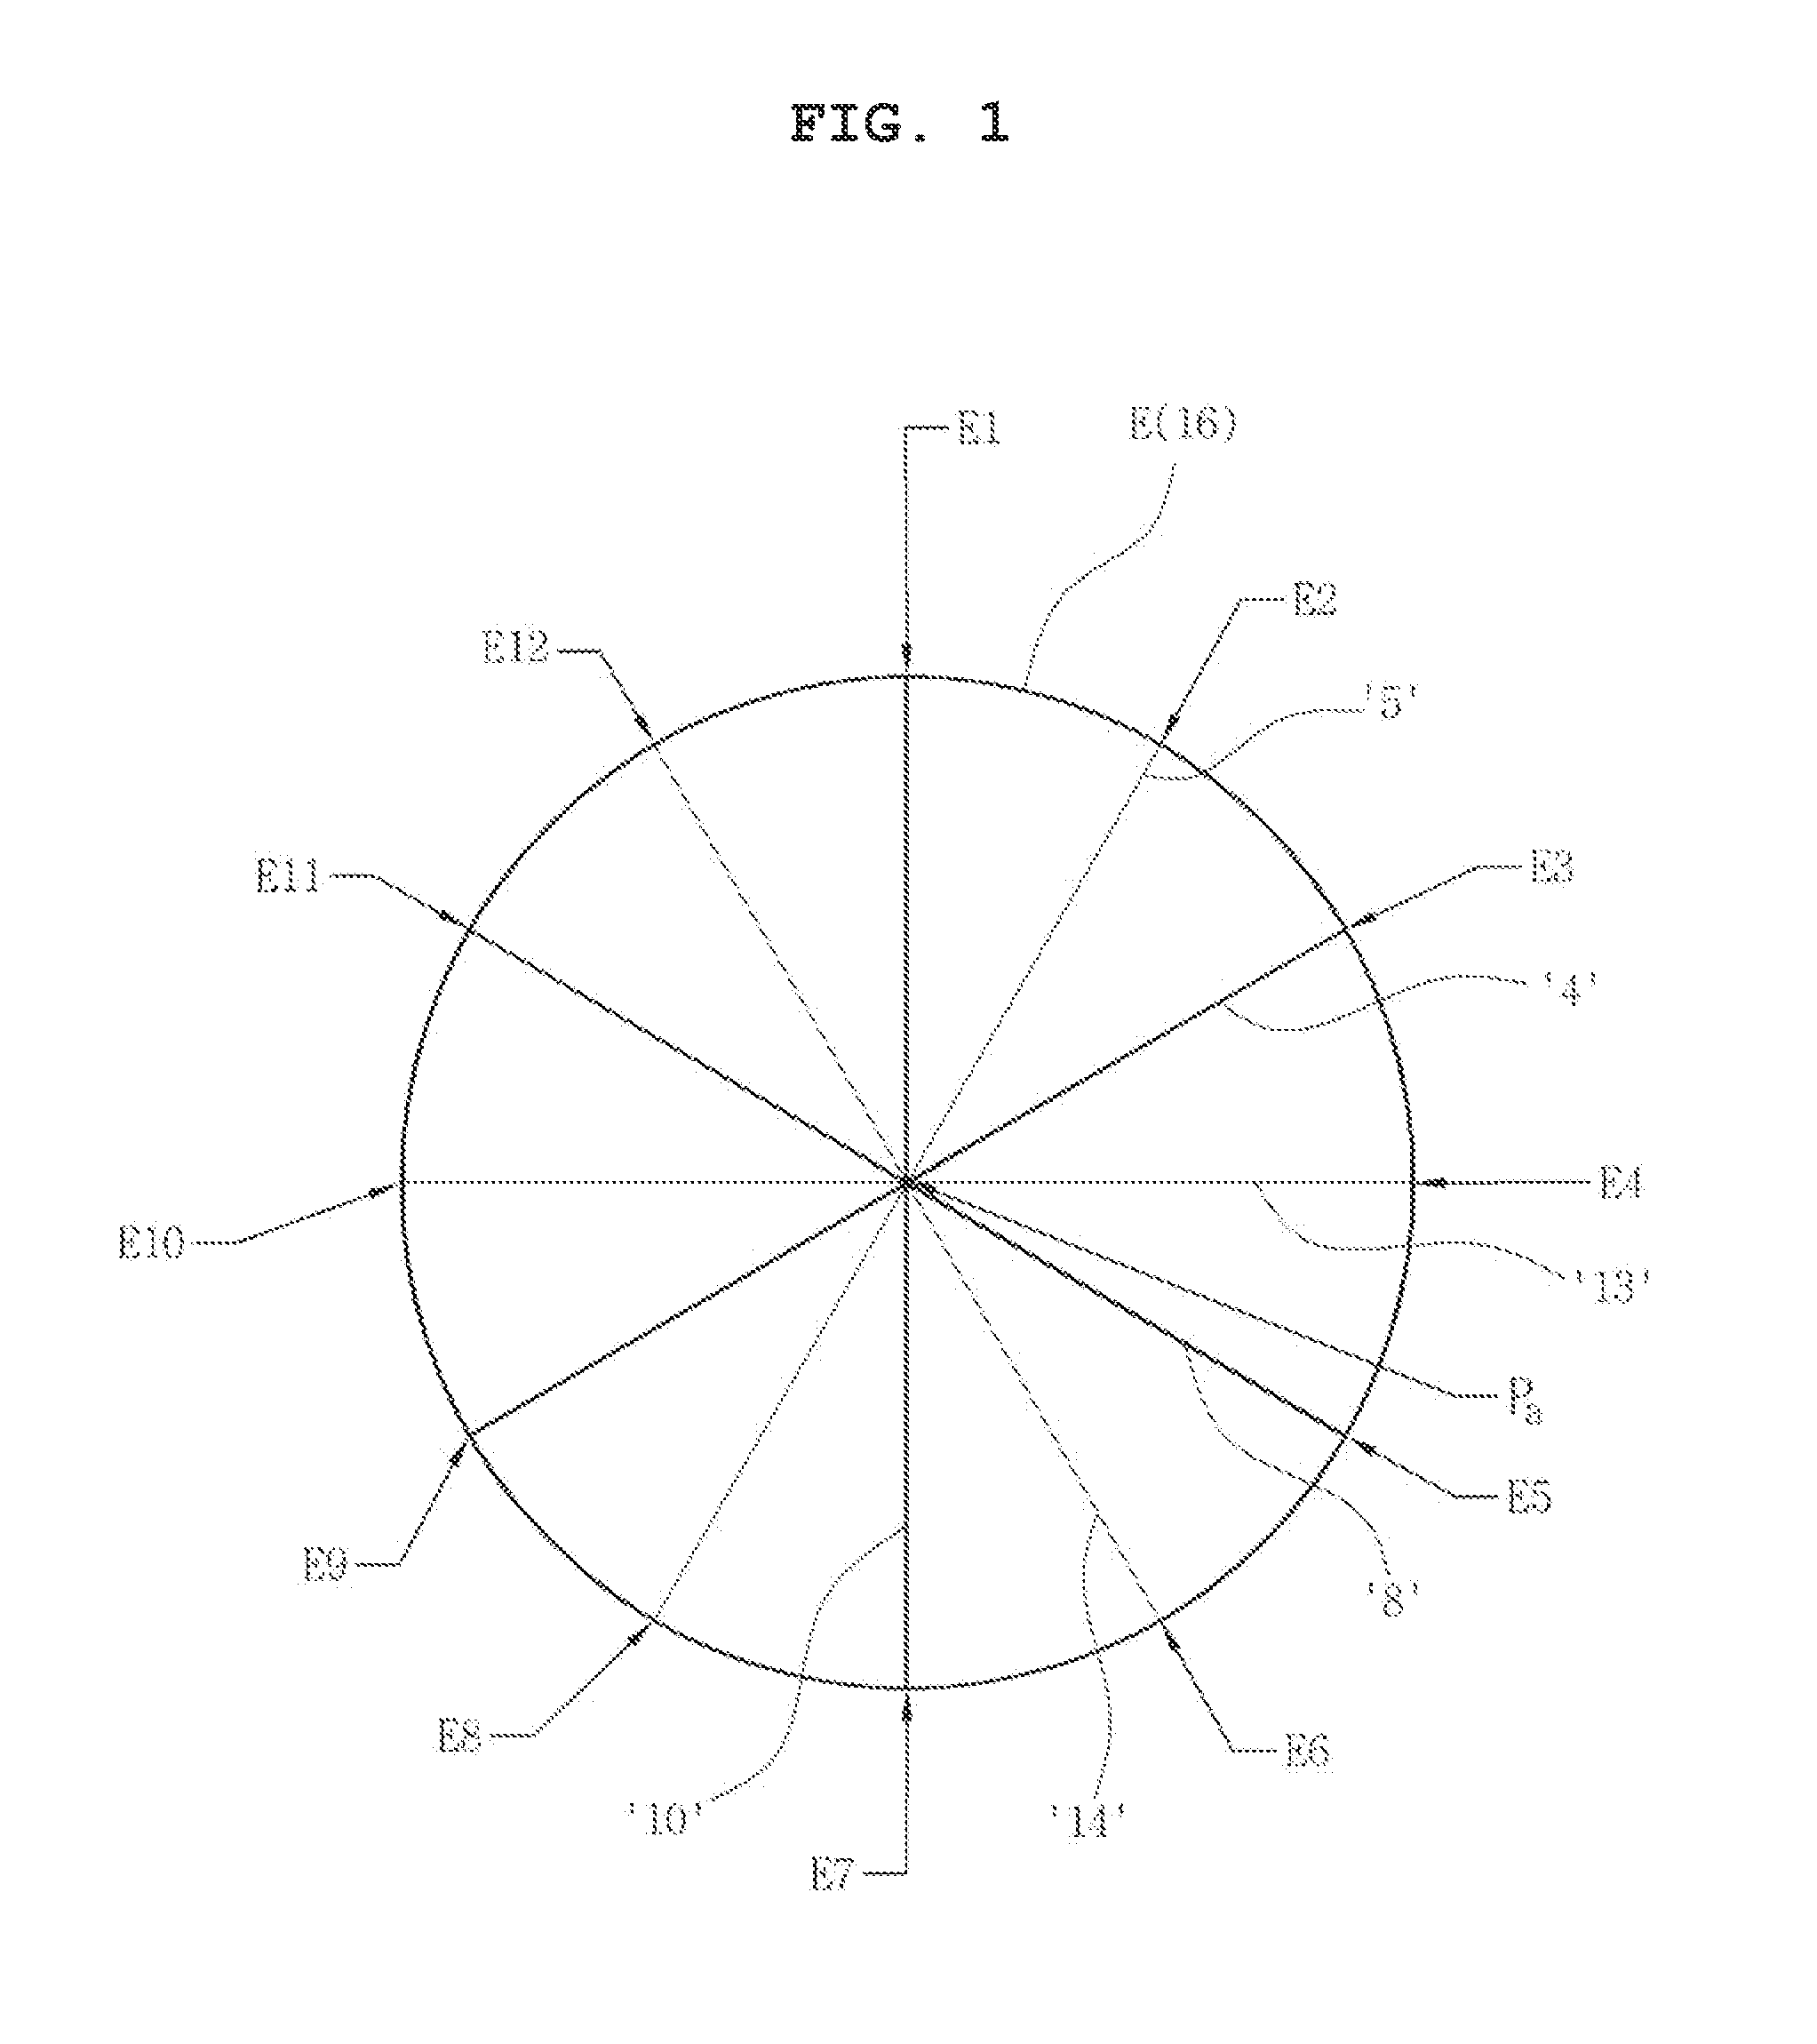 Golf ball with dimple pattern arranged in spherical polygons having sides with different lengths